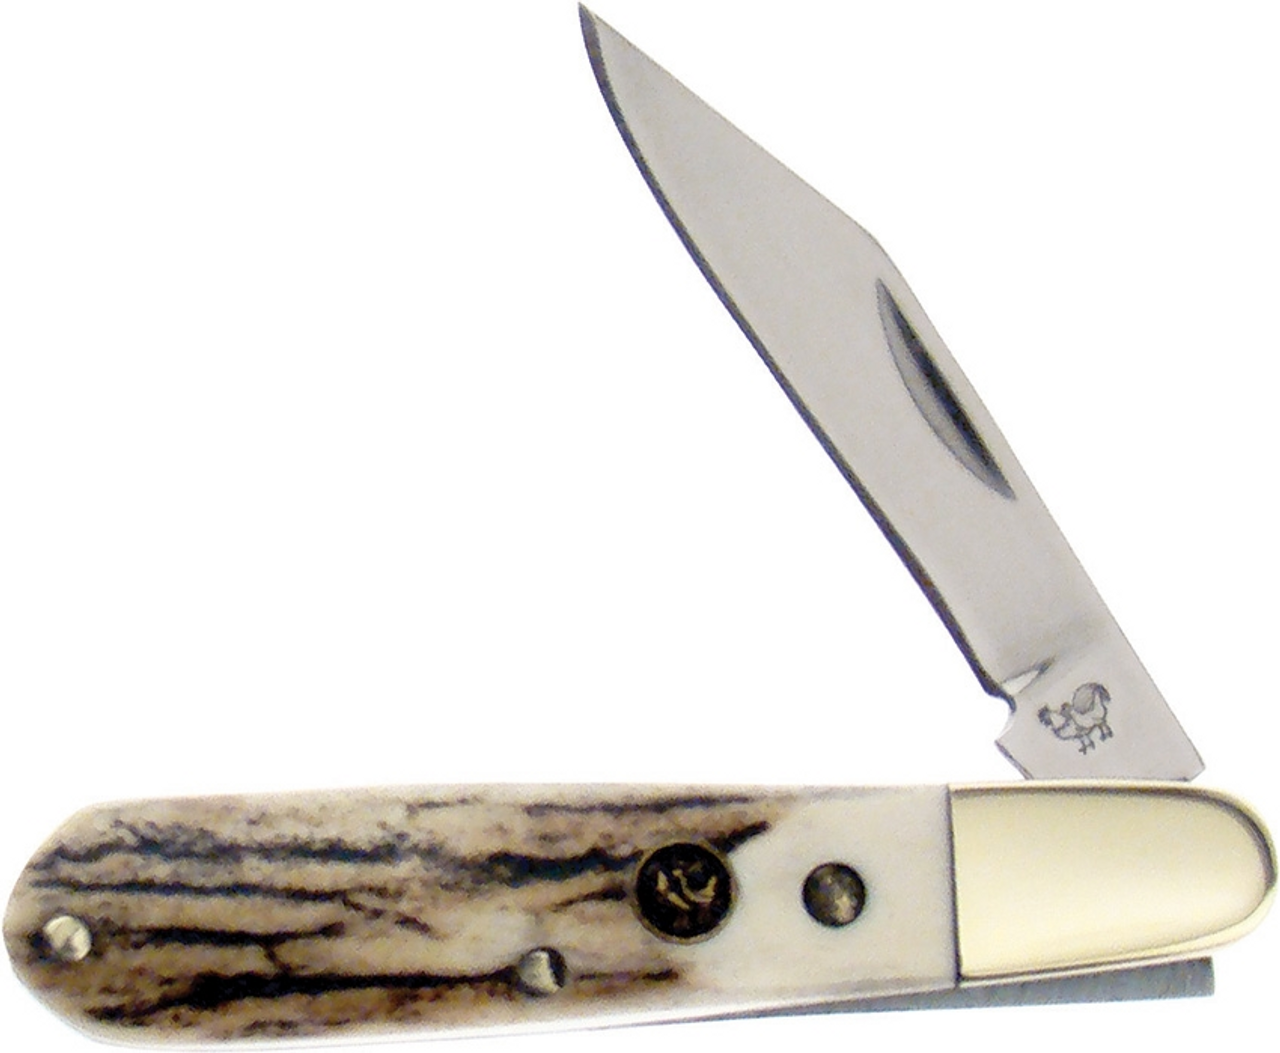 Hen & Rooster Knives 241DS, 1.75" SS Blade, Deer Stag Handle